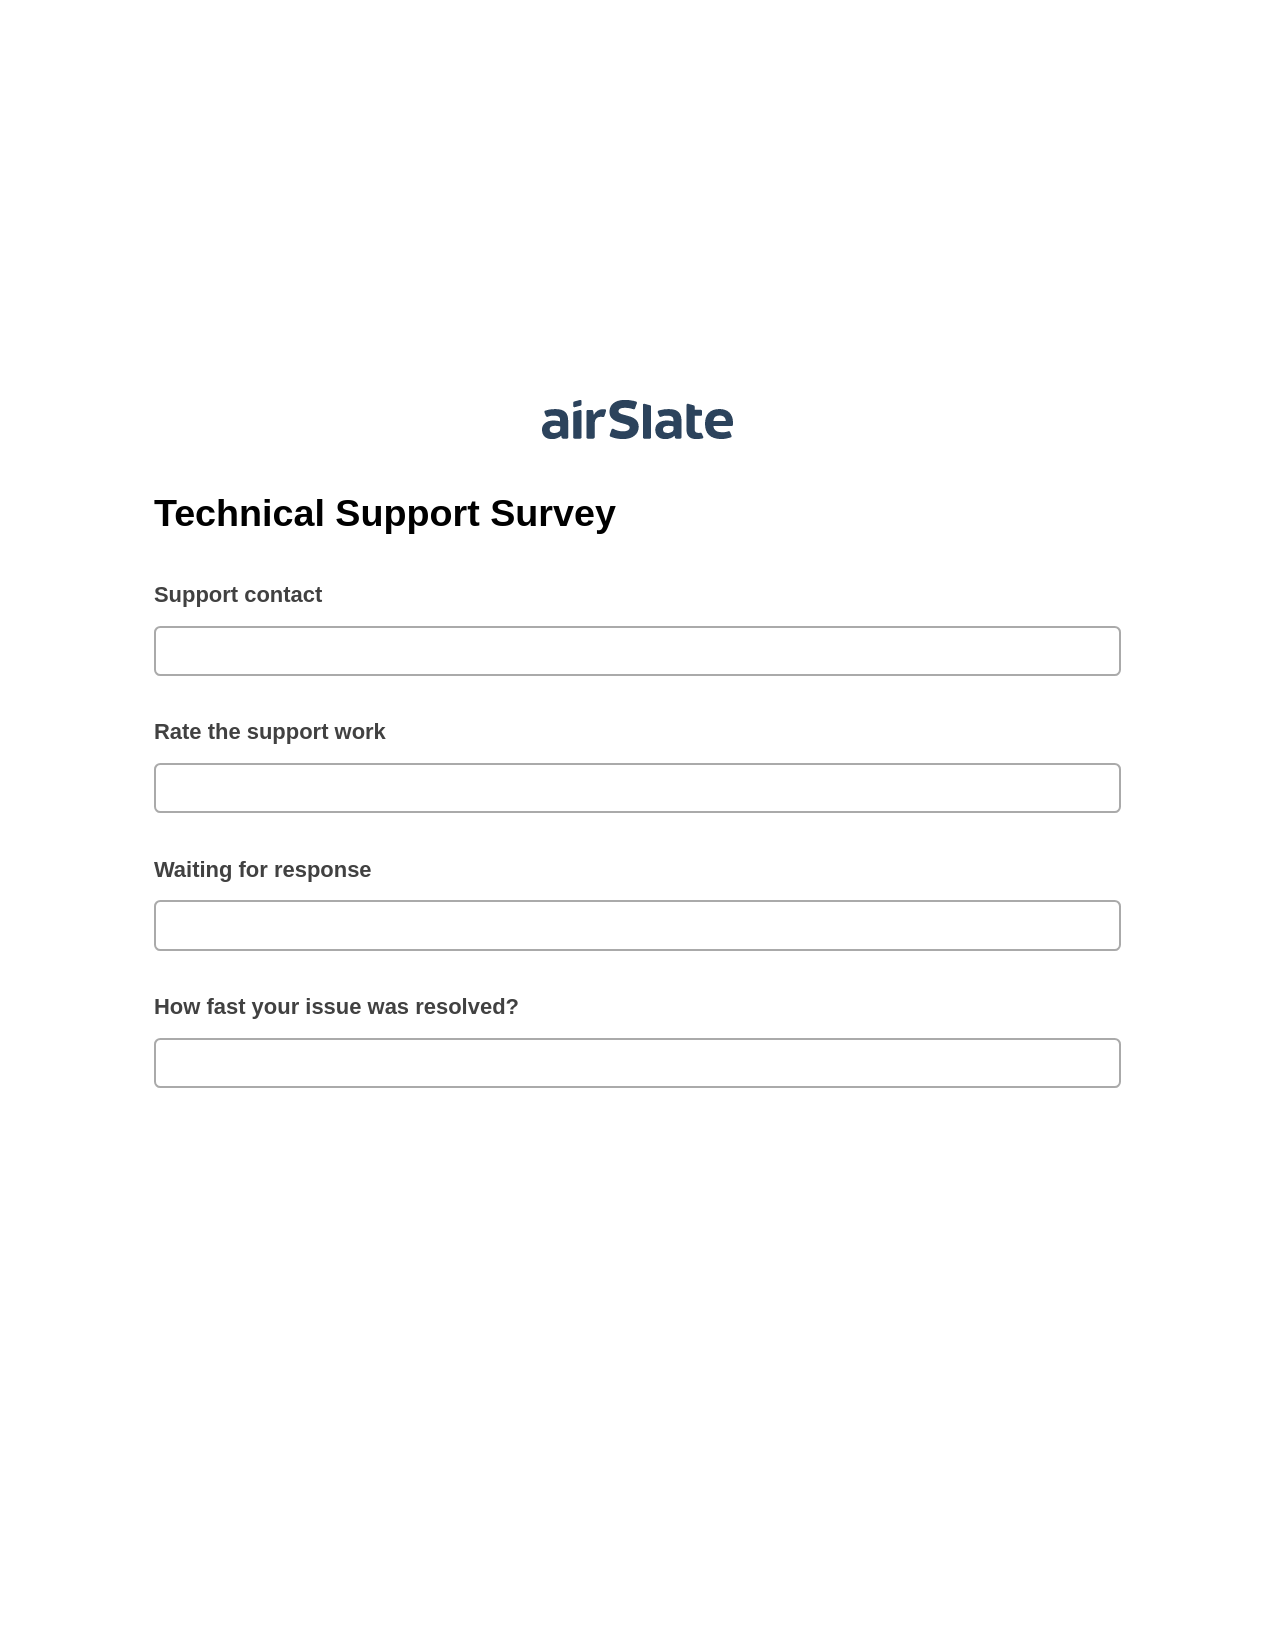 Technical Support Survey Pre-fill from MS Dynamics 365 Records, Create Slate every Google Sheet Update Bot, Post-finish Document Bot